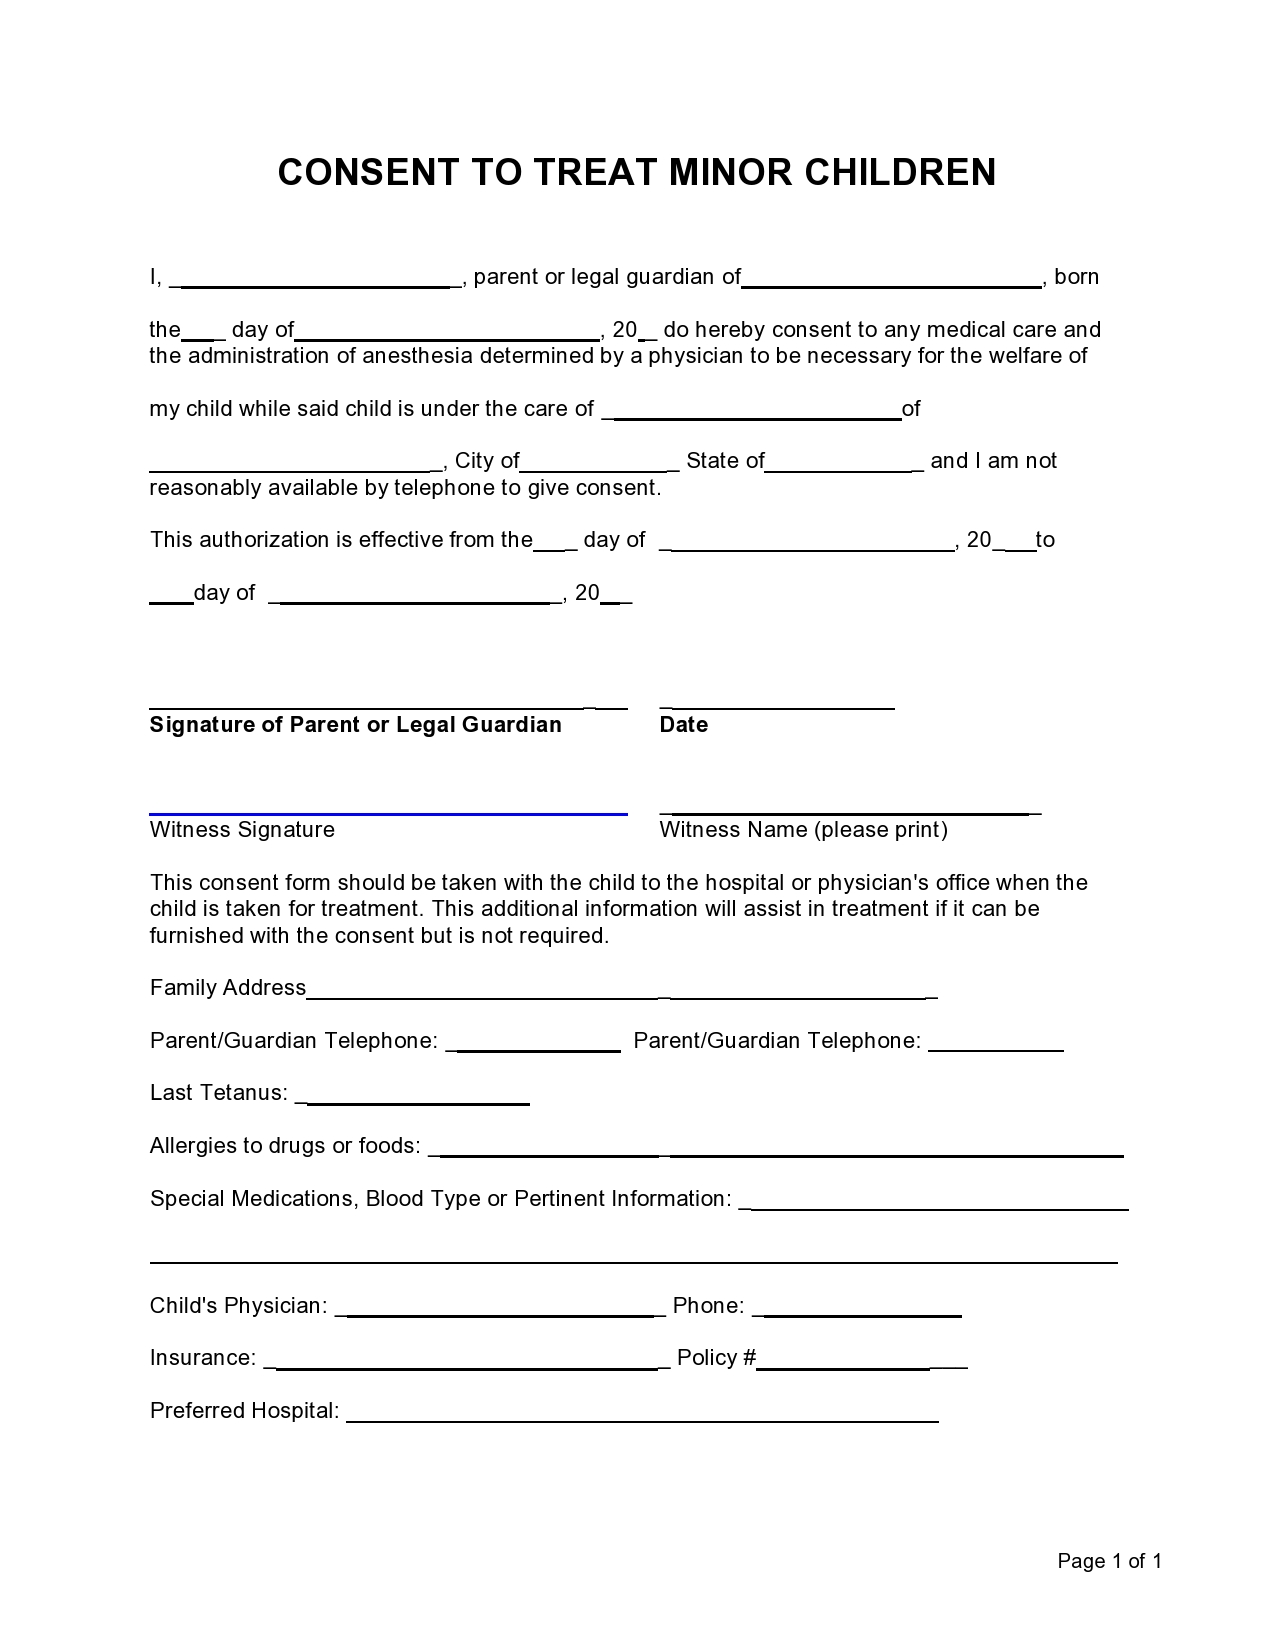 Free medical consent form for minor 02